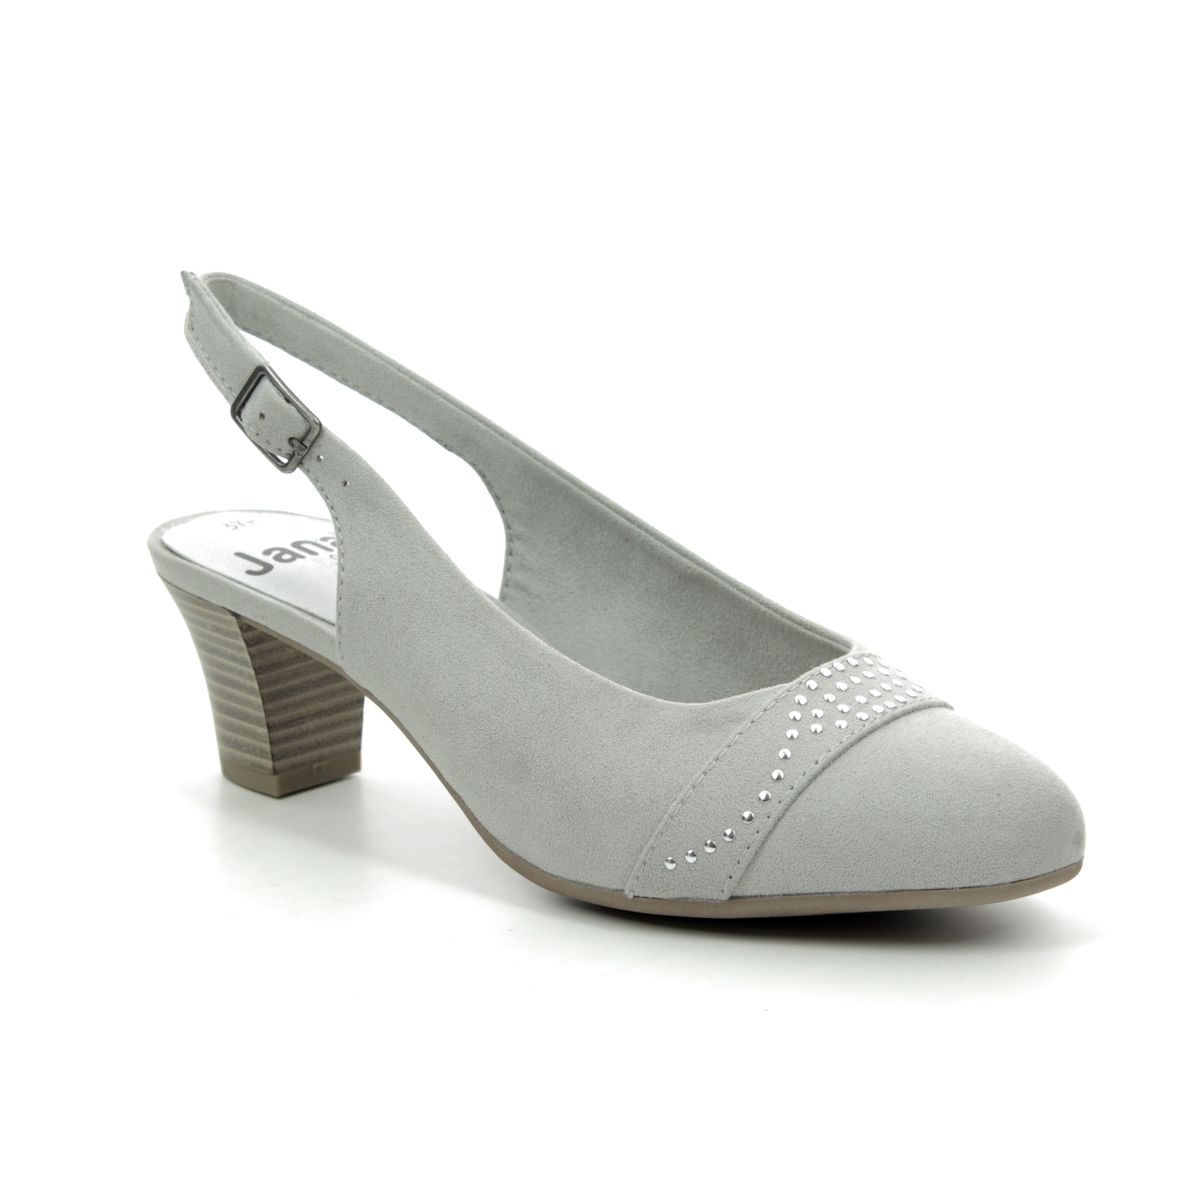 grey suede slingback shoes